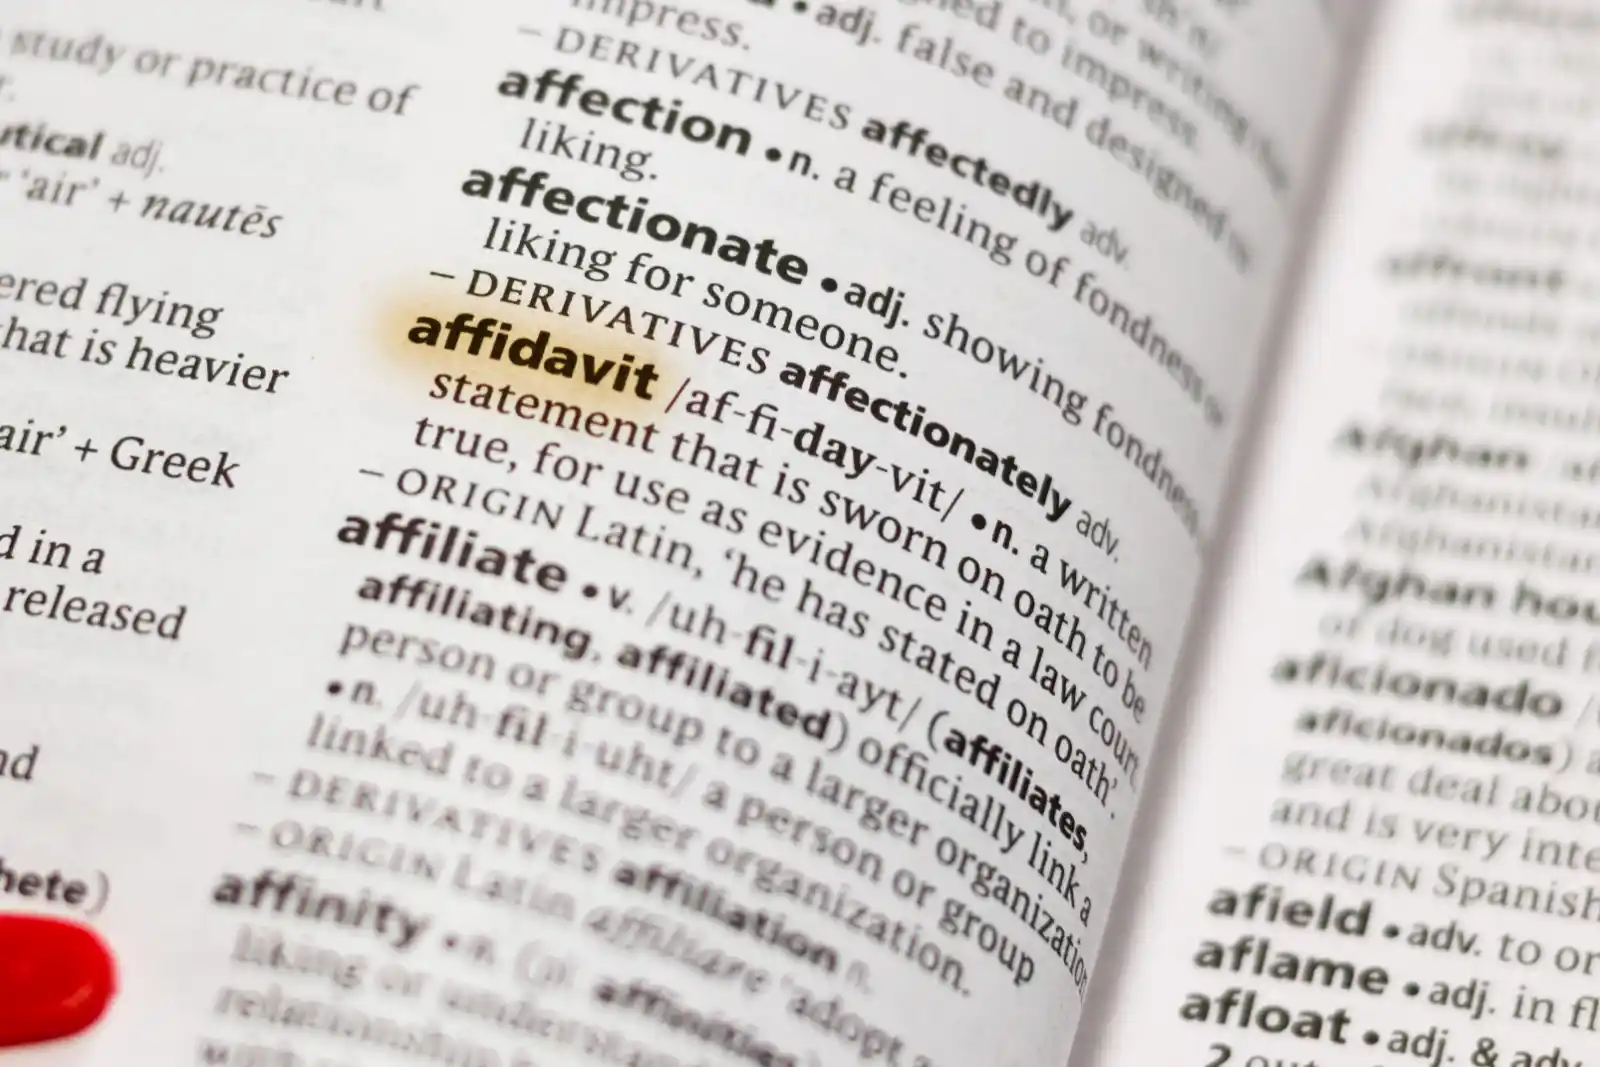 What is an affidavit and how are they used